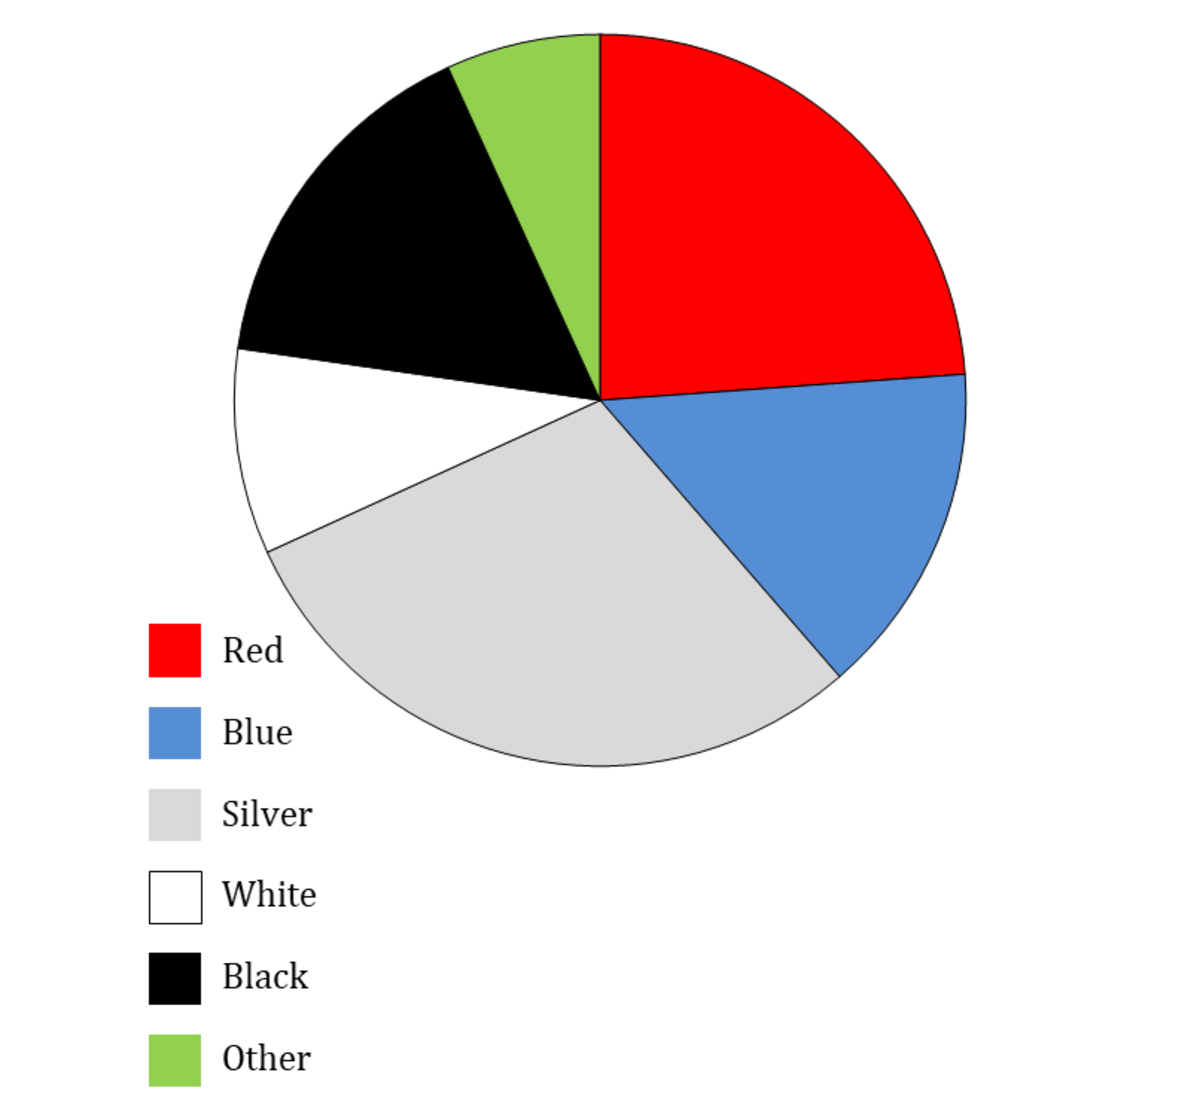 Punjabi] Draw a pie chart of the data given below: The time spent by